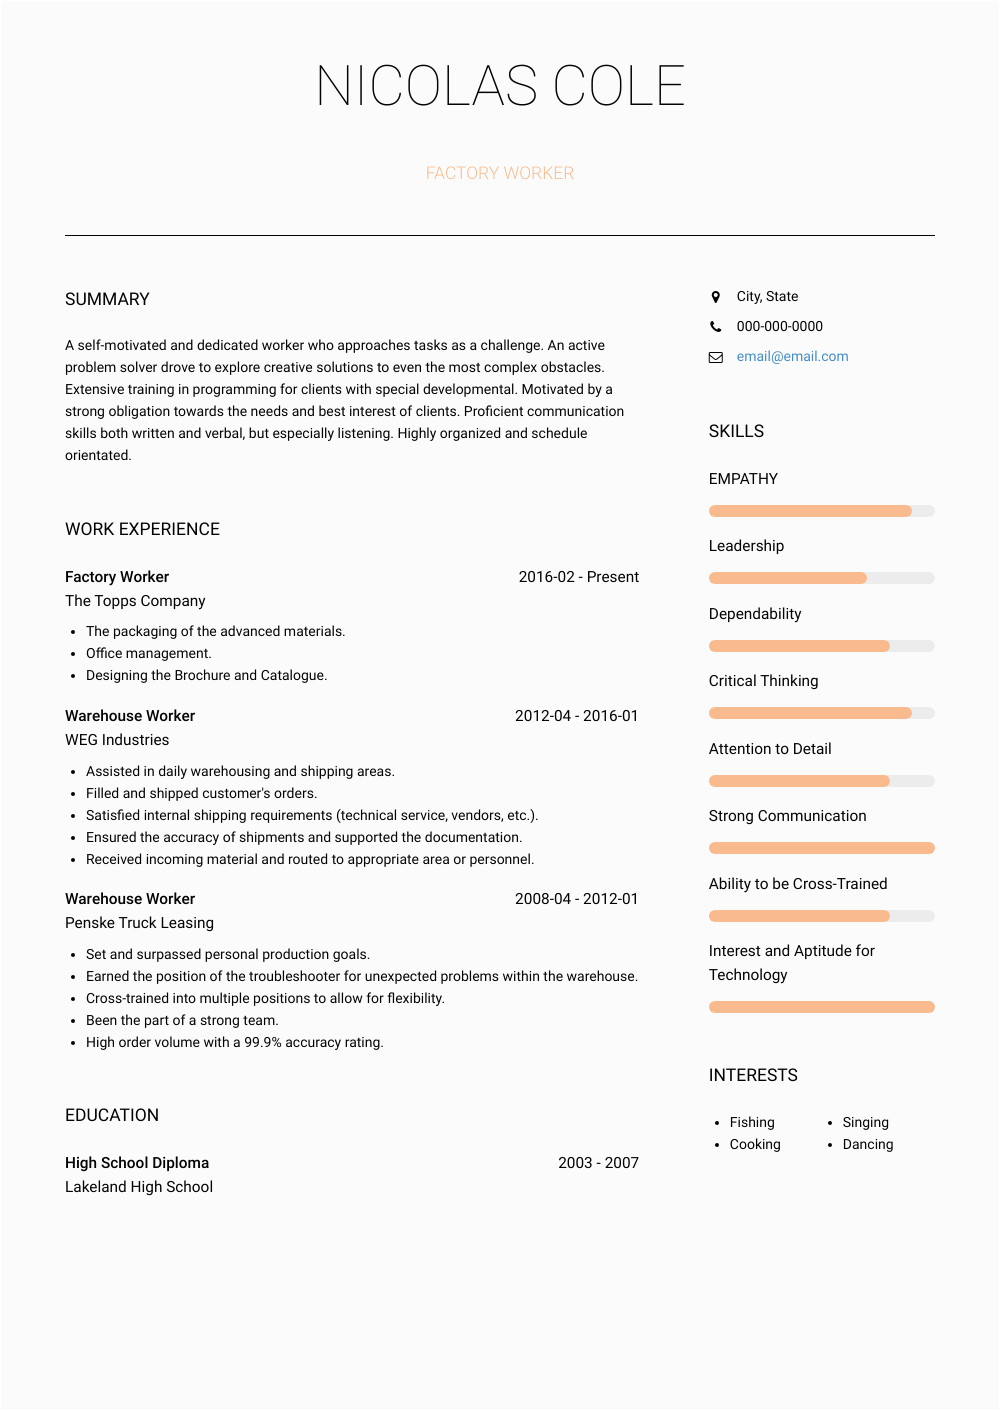 Sample Resume for Factory Worker Position Factory Worker Resume Samples and Templates